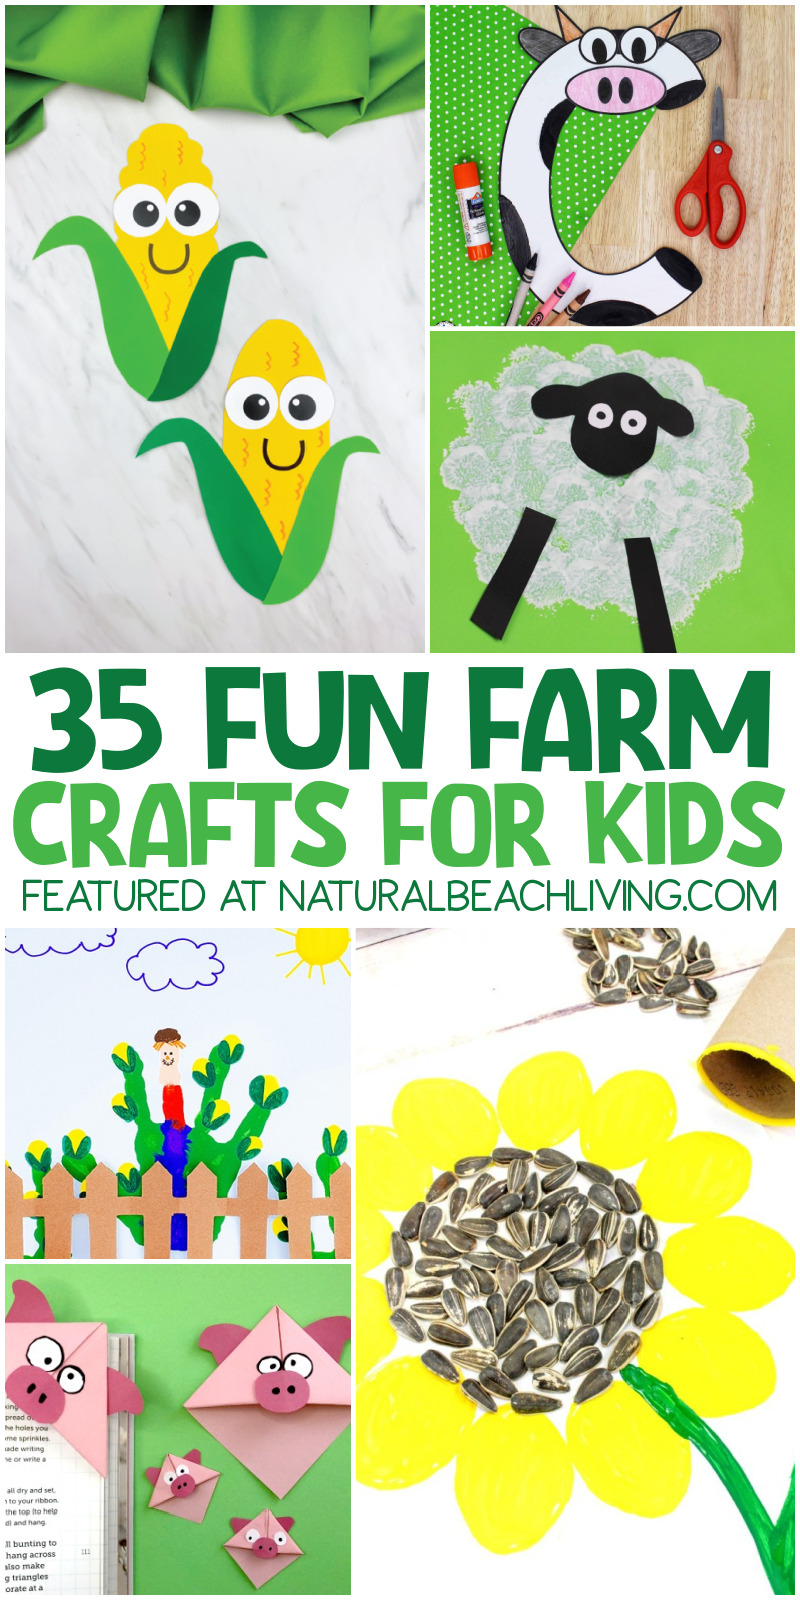 35 fun farm theme preschool crafts that will keep them entertained and engaged. These Easy Farm Crafts are fun crafts using materials found around the house. Whether you want to teach your preschooler about farm animals or just want creative time as a family, these Farm Arts and Craft Projects are sure to provide hours of fun for kids!